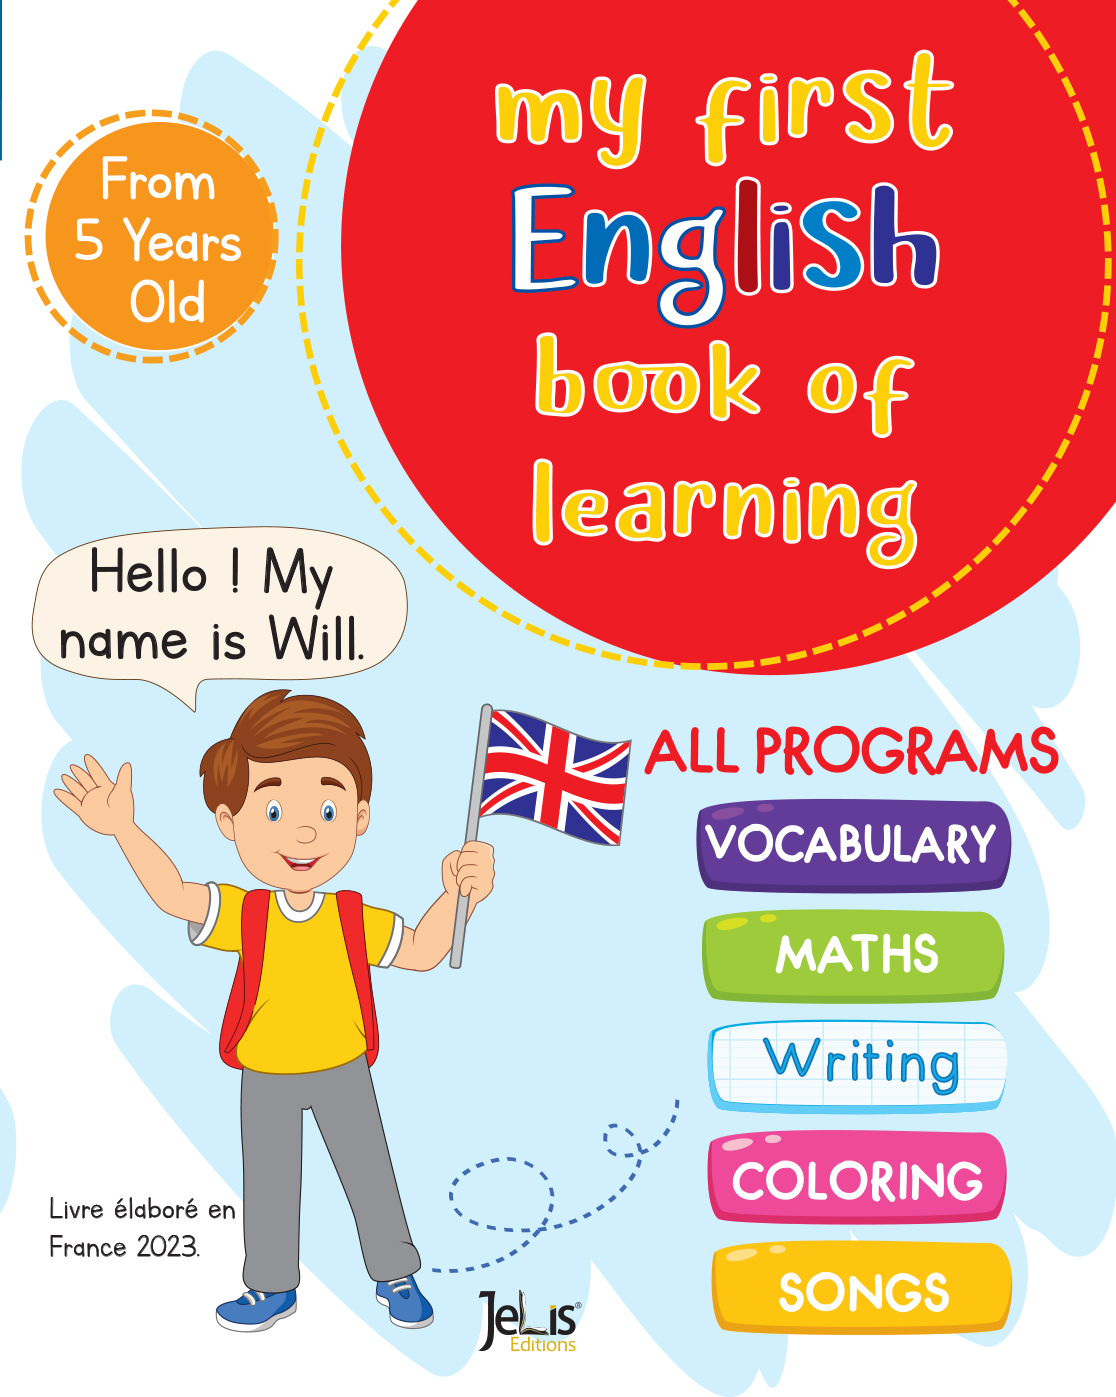 My first english book of learning